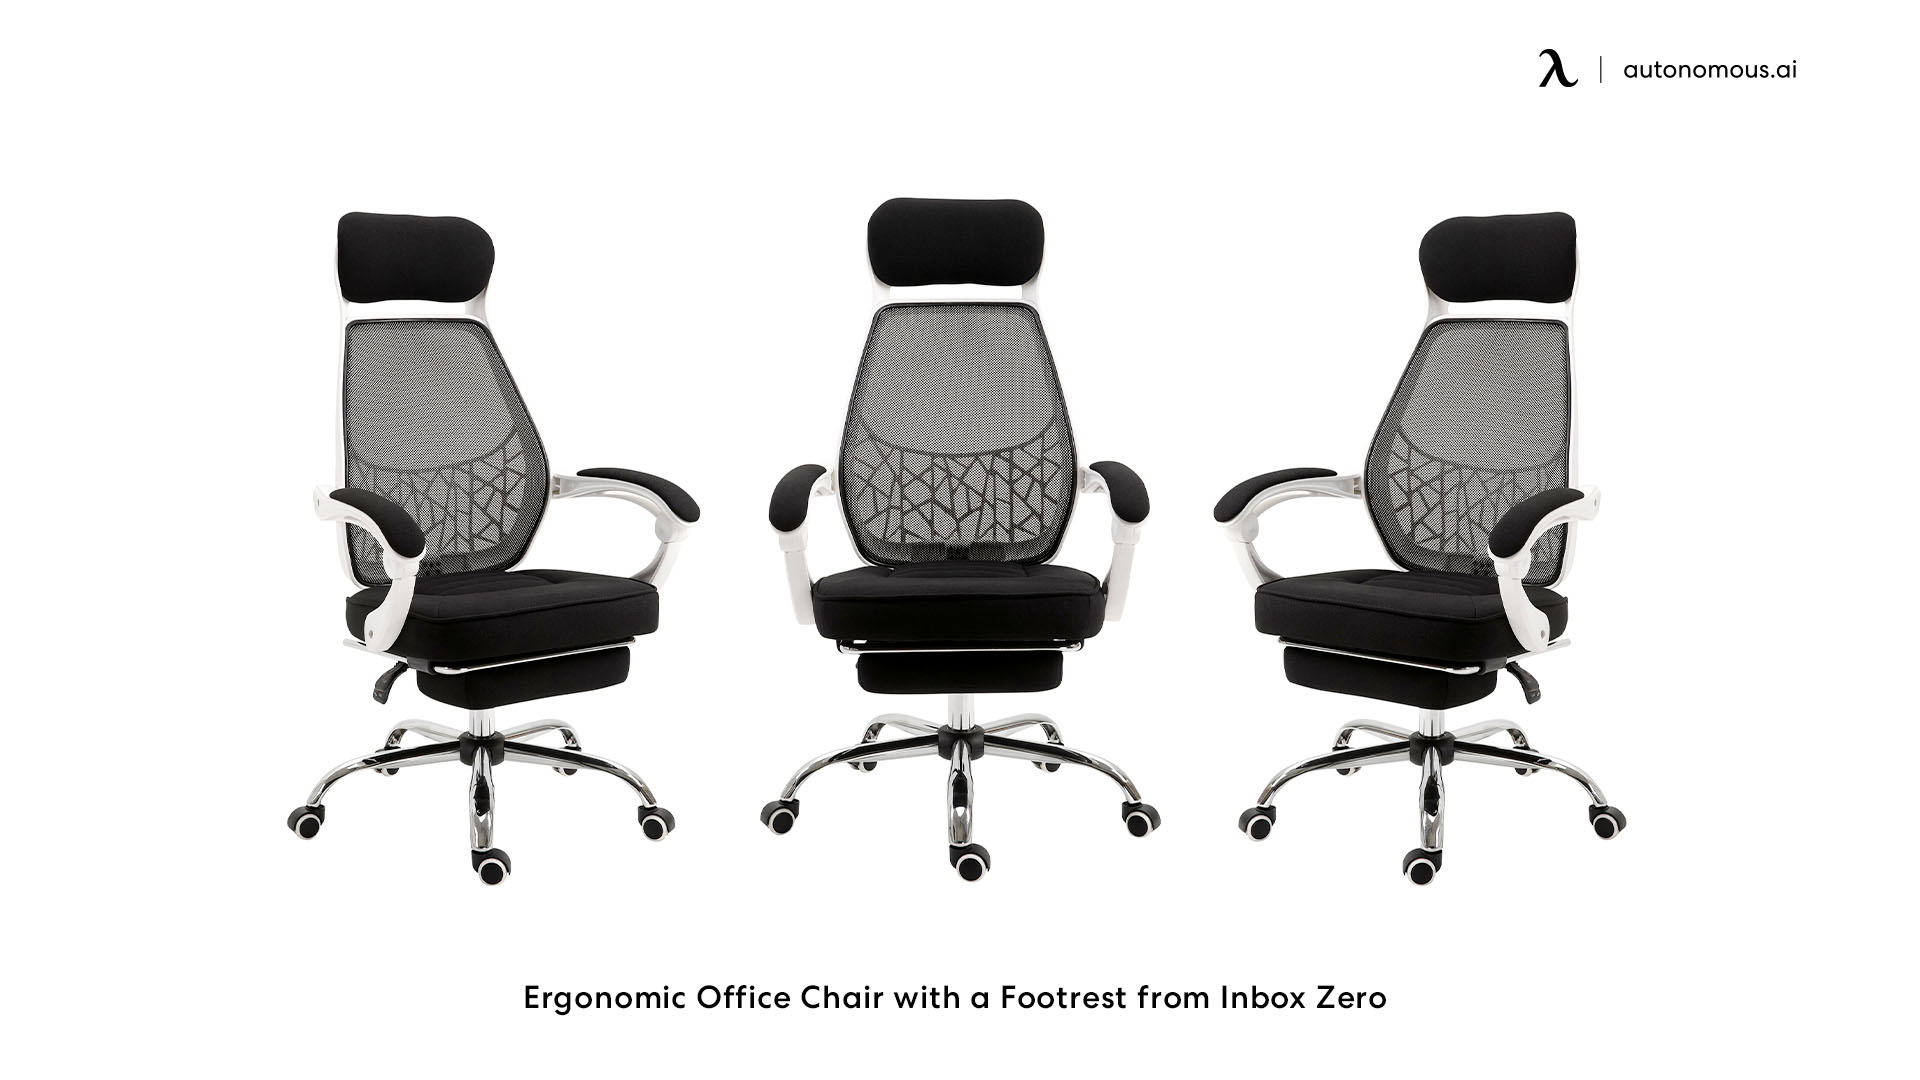 Ergonomic Office Chair with a Footrest from Inbox Zero